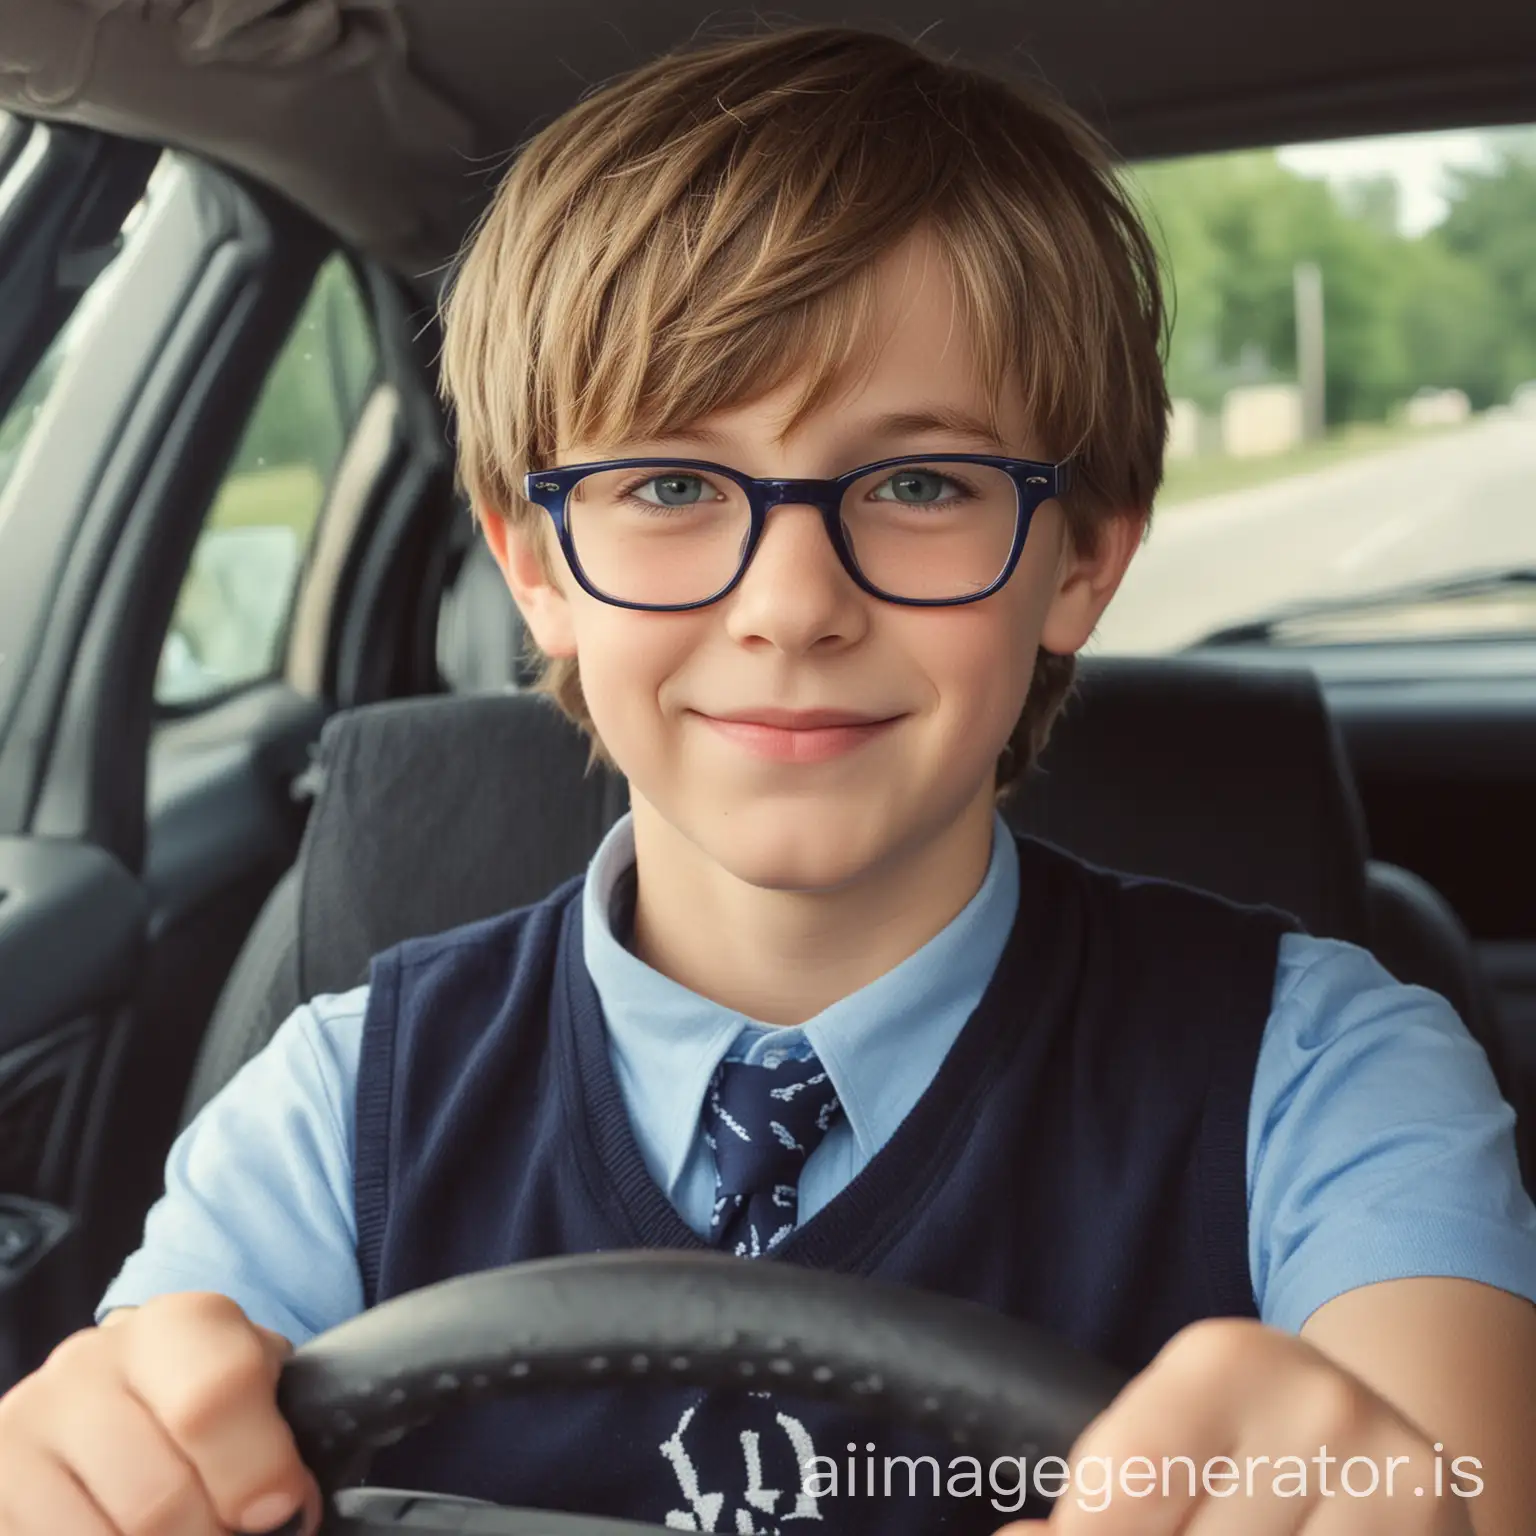 Adorable-11YearOld-Boy-Wearing-Reading-Glasses-Driving-a-Manual-Car